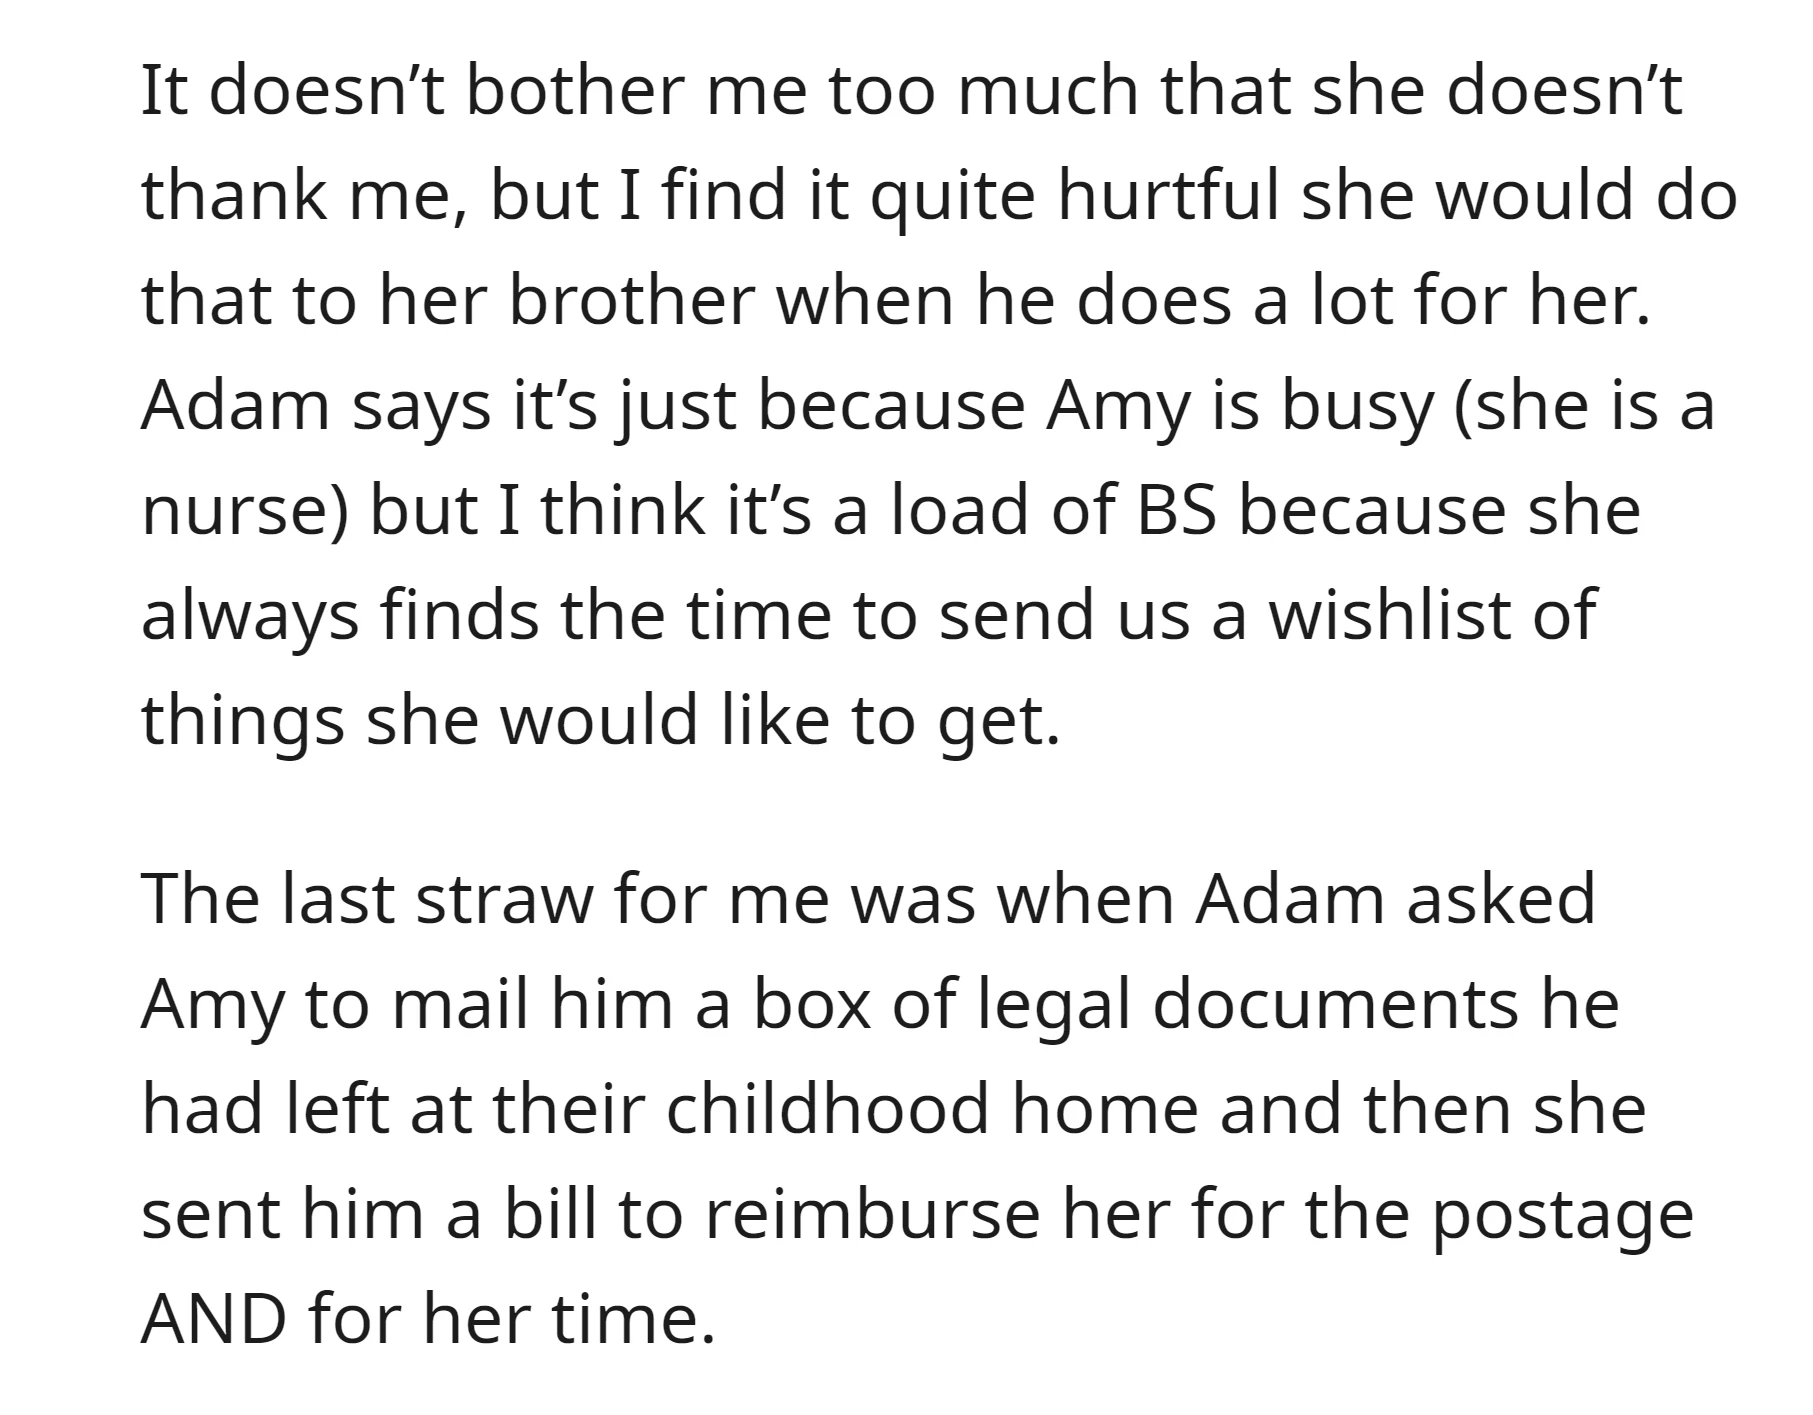 When OP's boyfriend Adam asked Amy to mail him a box of legal documents